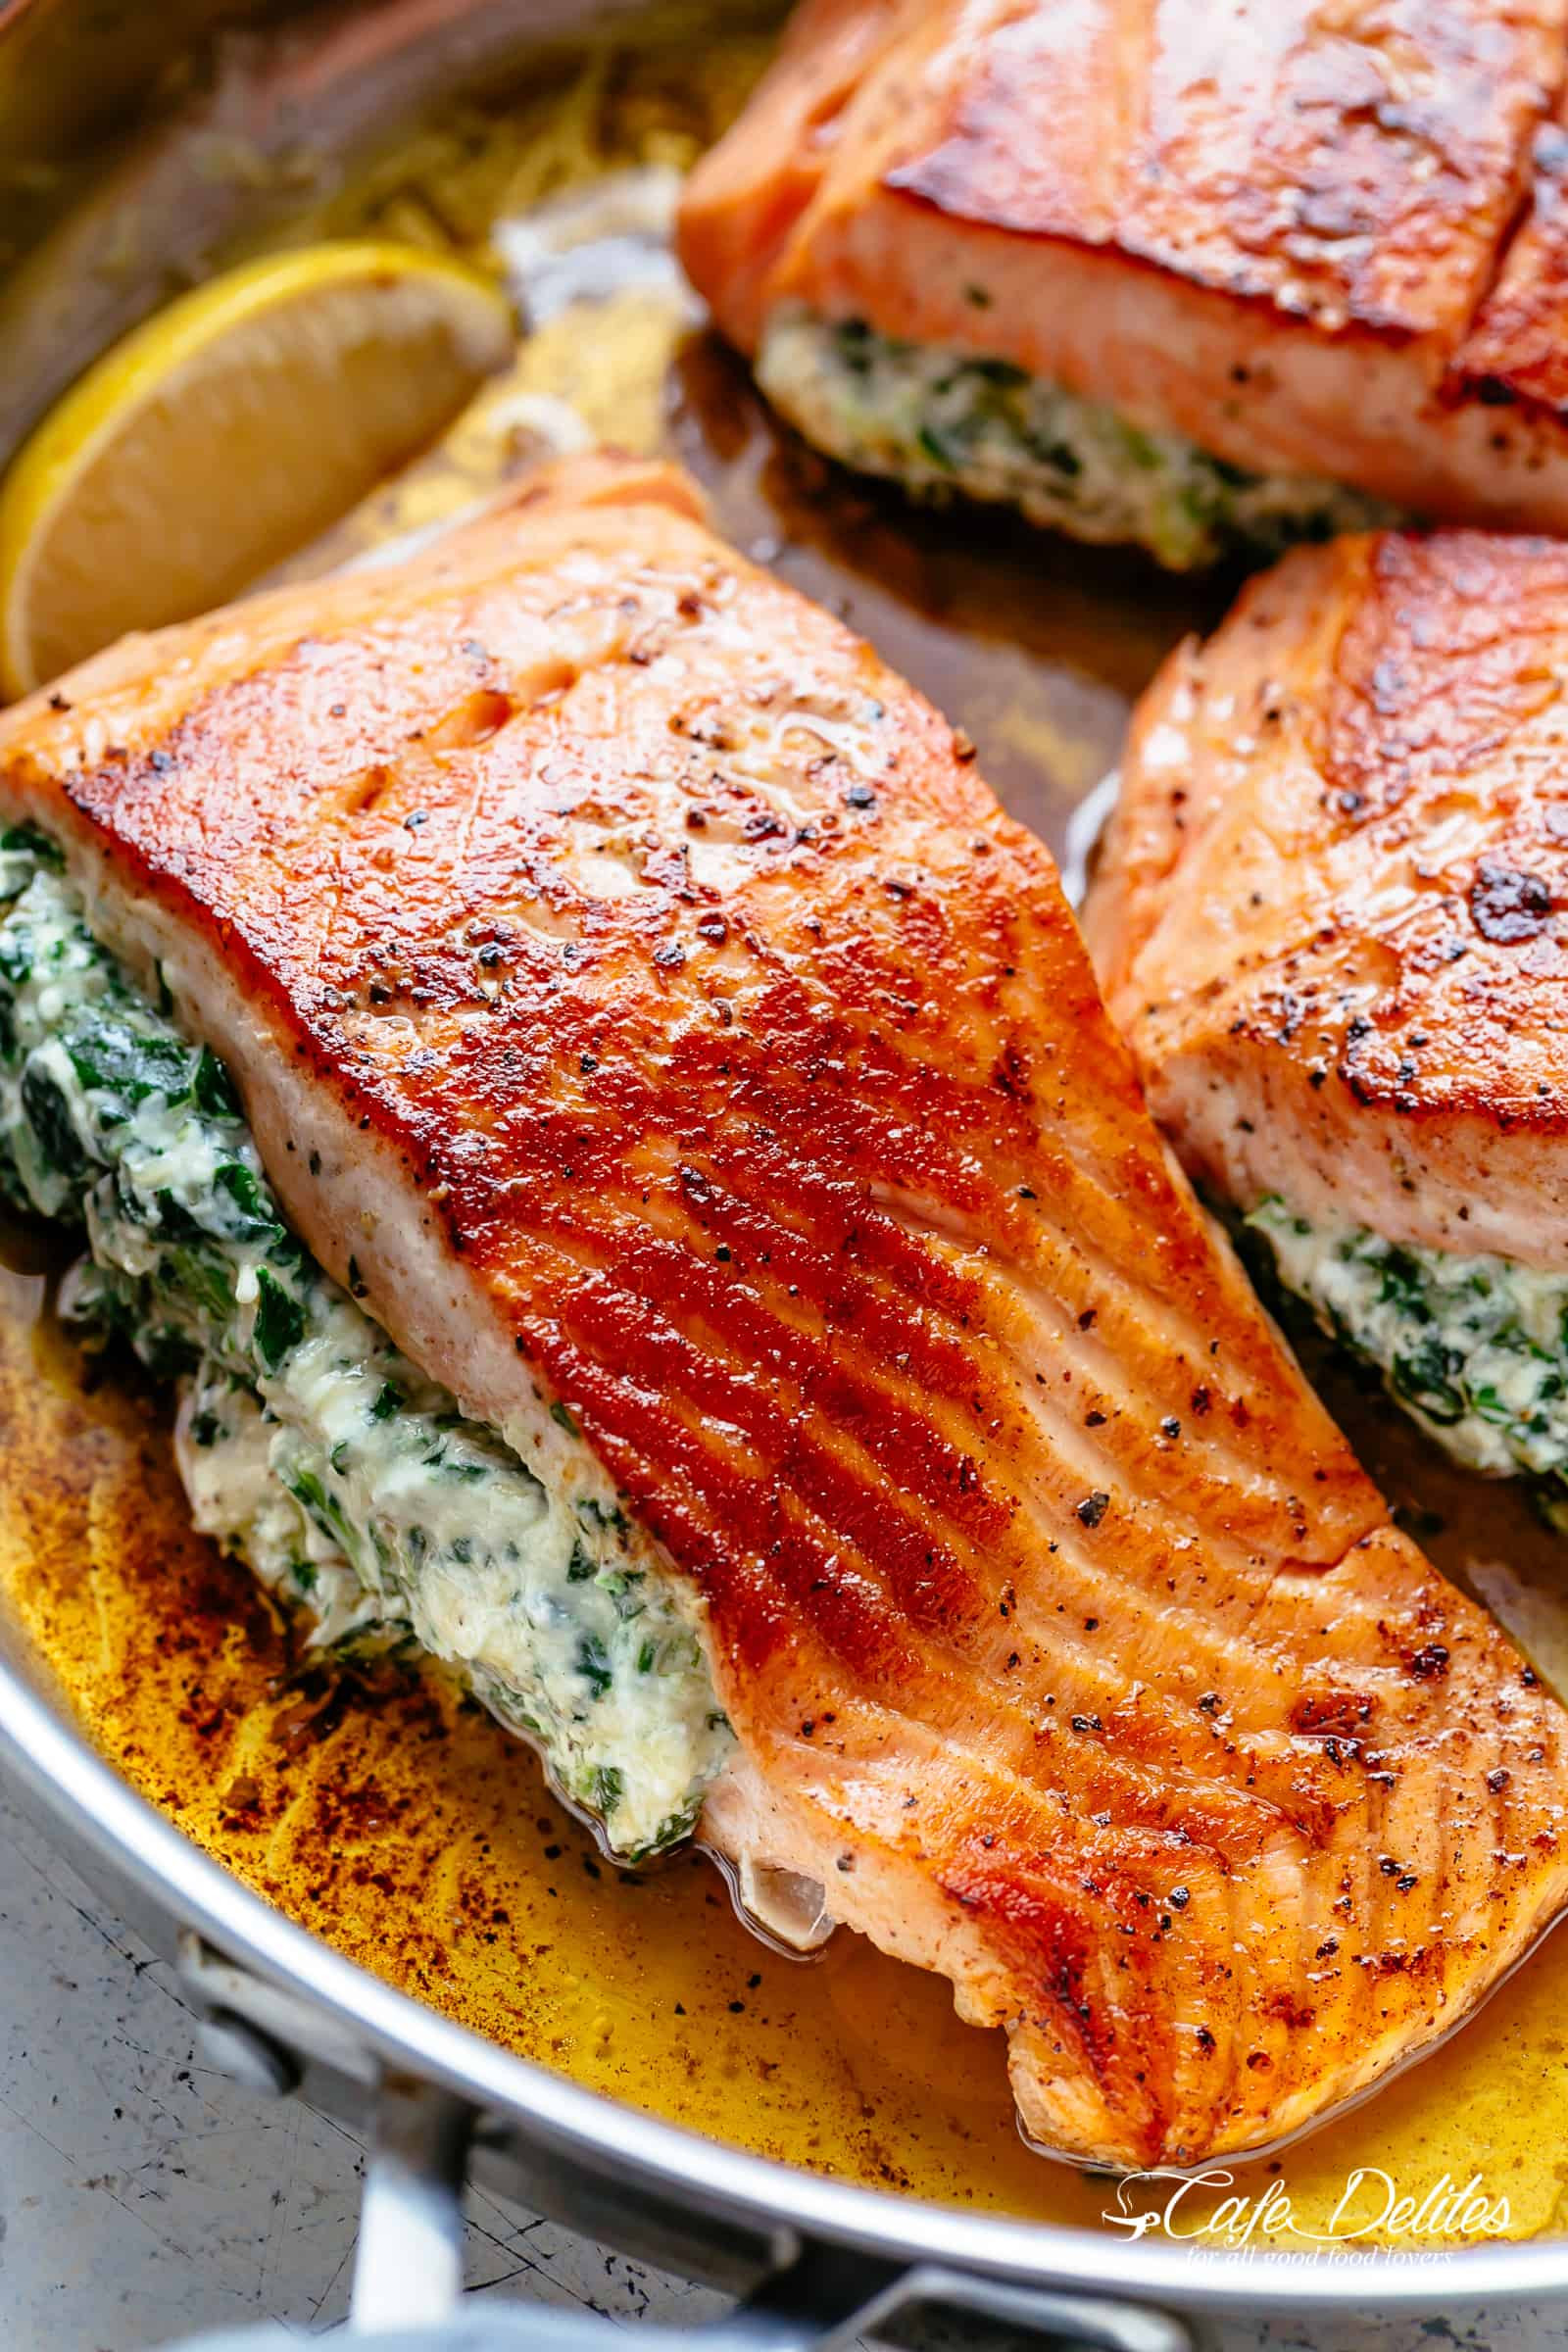 Low Cholesterol Salmon Recipes
 BEST HEALTHY RECIPES Cafe Delites